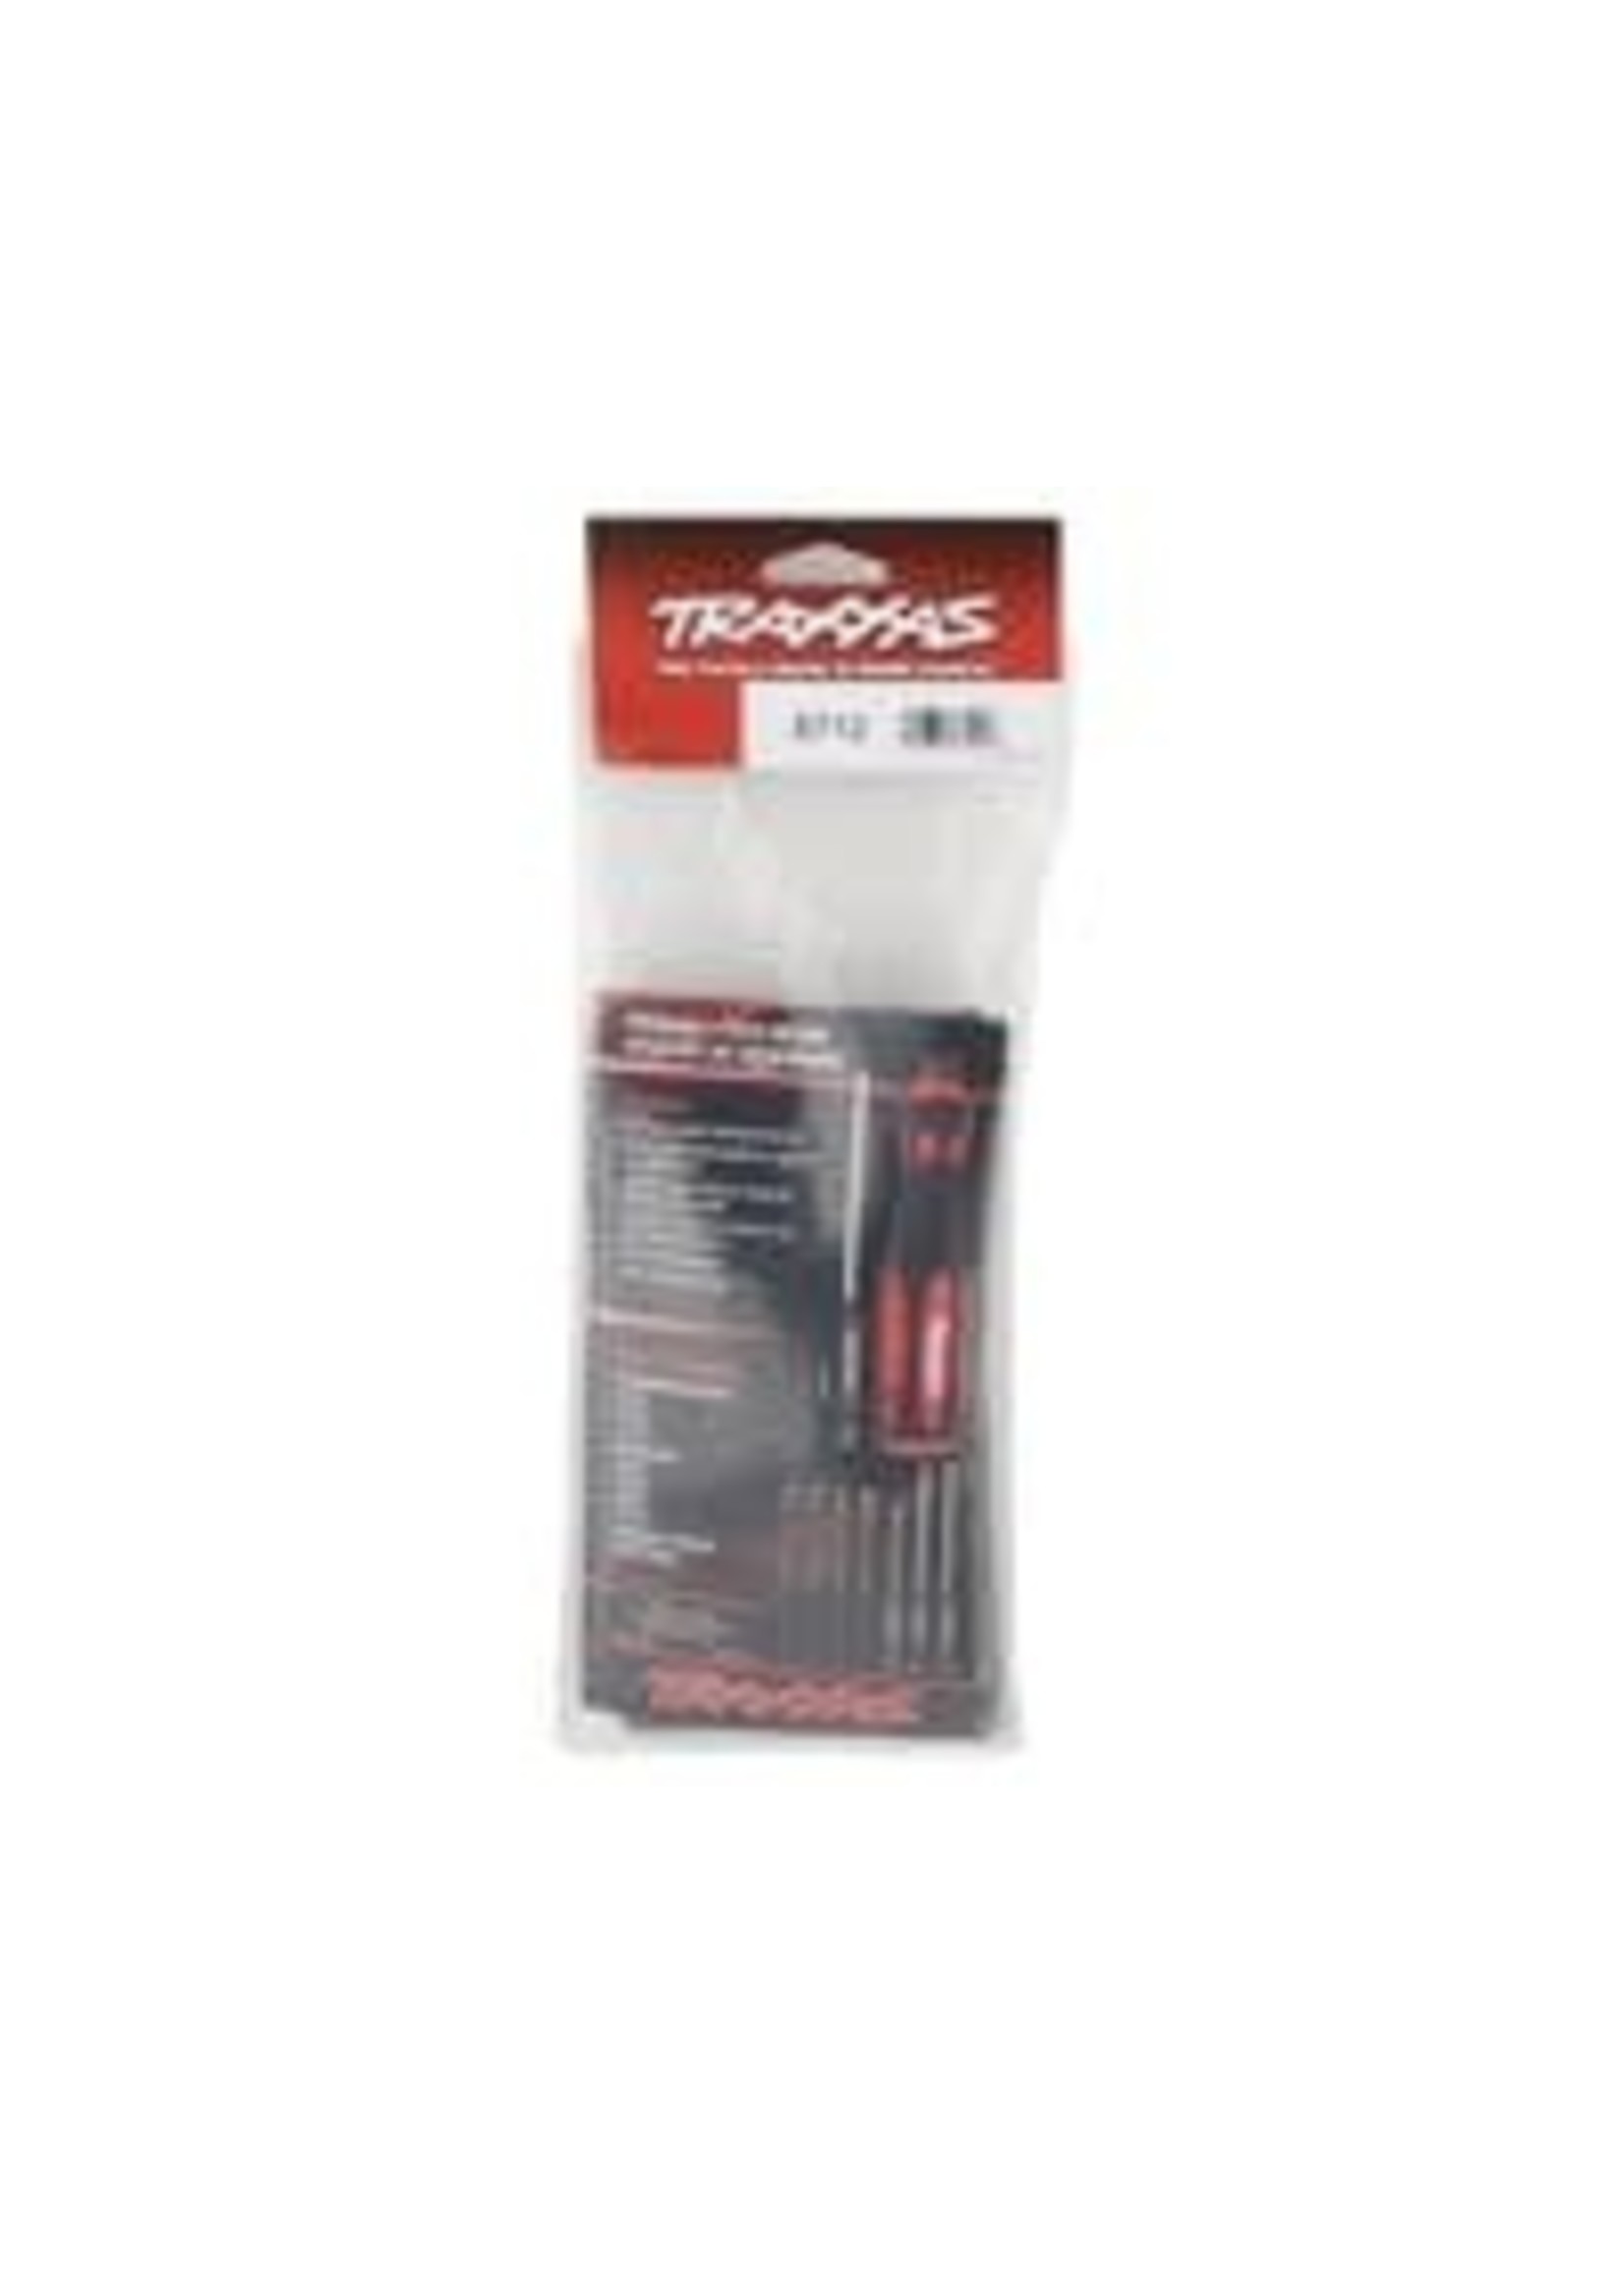 Traxxas 8712 Speed Bit Essentials Set, hex and nut driver, 7-piece, includes premium handle (medium), travel pouch, hex drivers (straight: 1.5mm, 2.0mm, 2.5mm) and nut drivers (5.0mm, 5.5mm, 7.0mm, and 8.0mm), 1/4'' drive